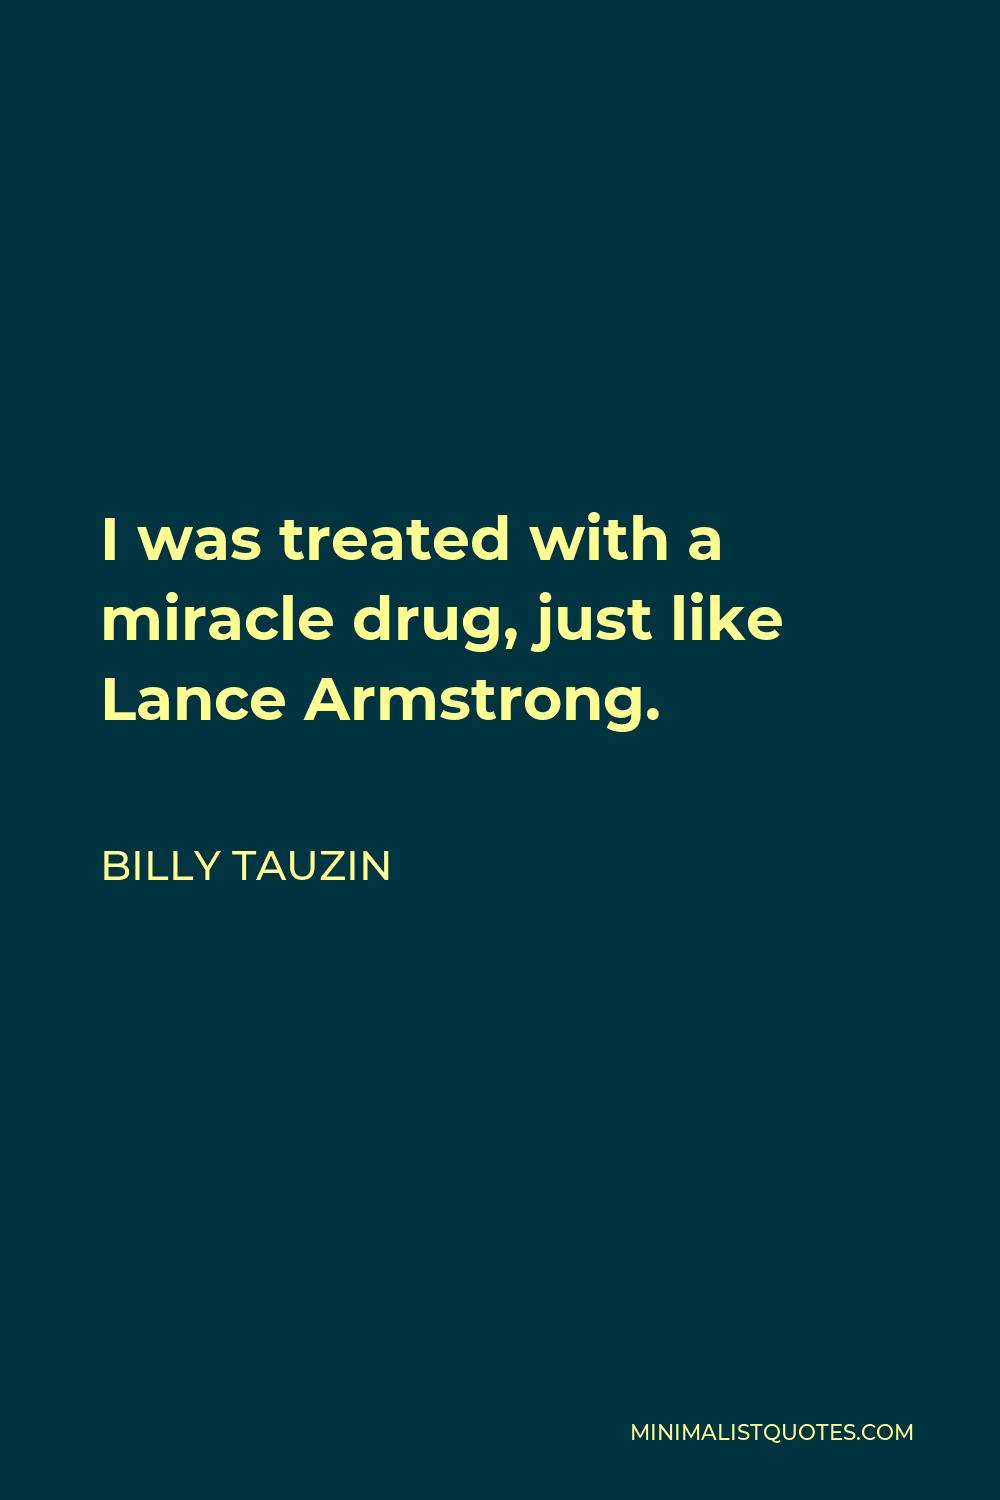 Billy Tauzin Quote - I was treated with a miracle drug, just like Lance Armstrong.